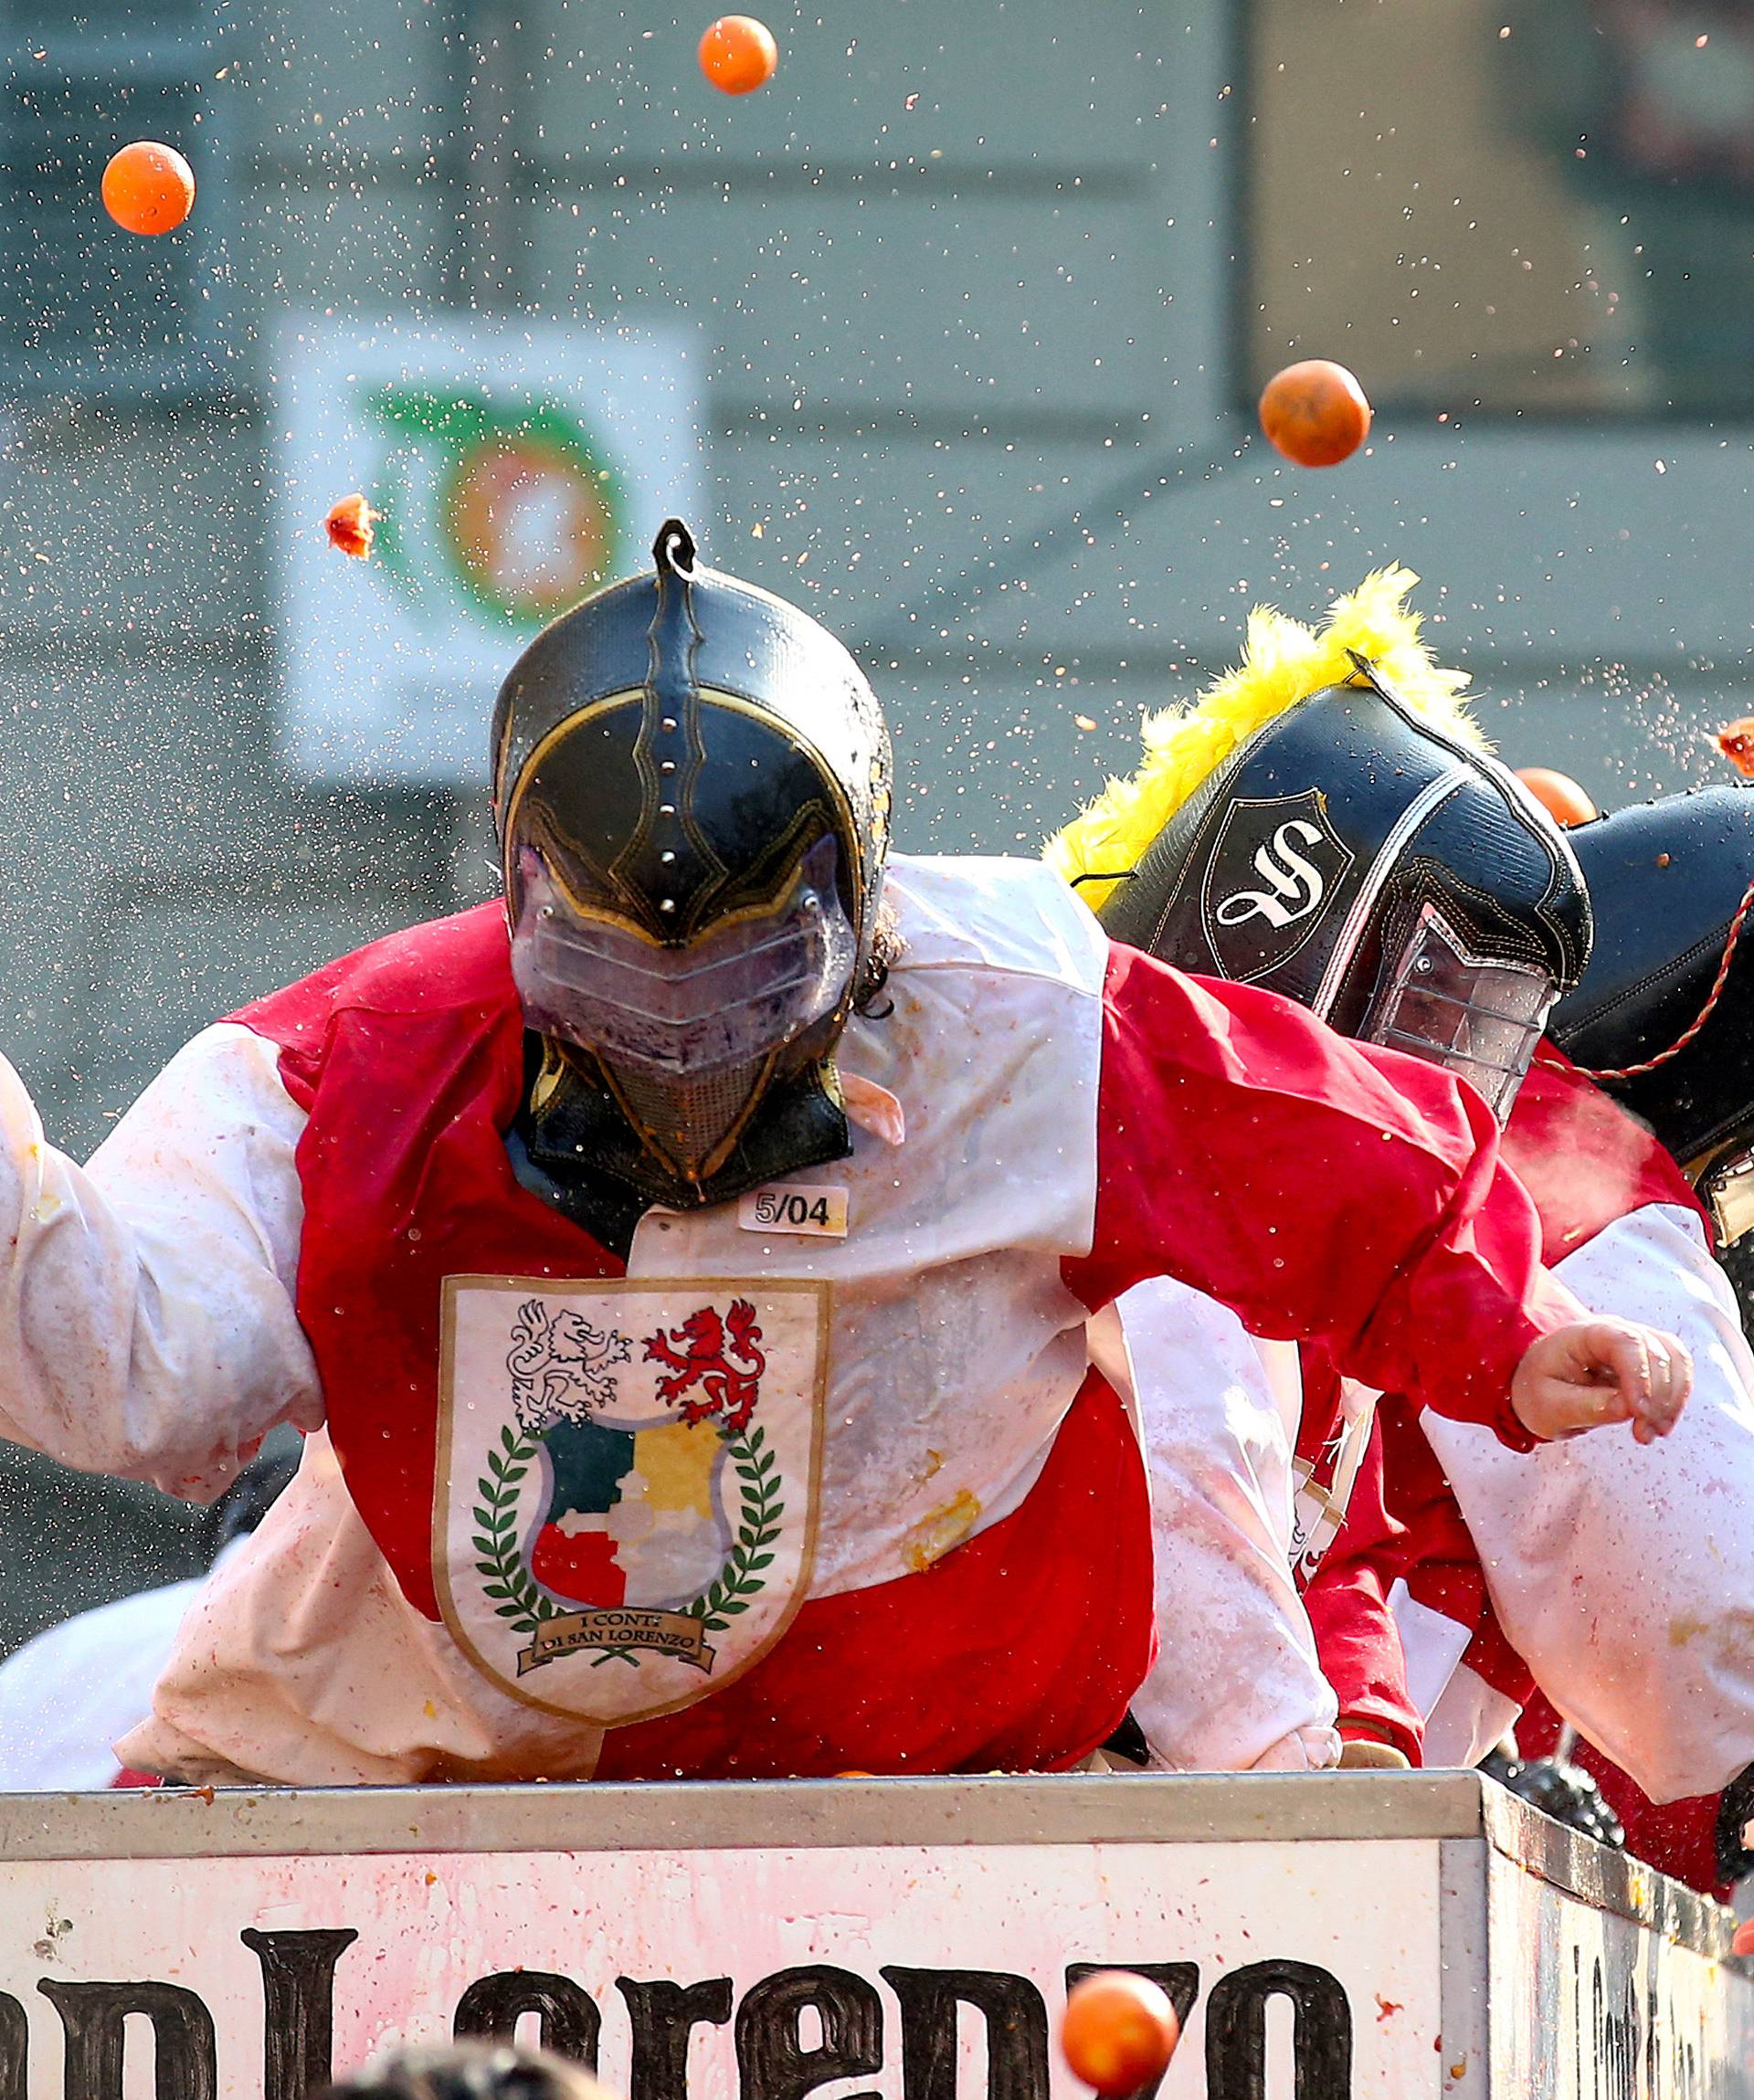 Members of rival teams fight with oranges during an annual carnival battle in the northern Italian town of Ivrea